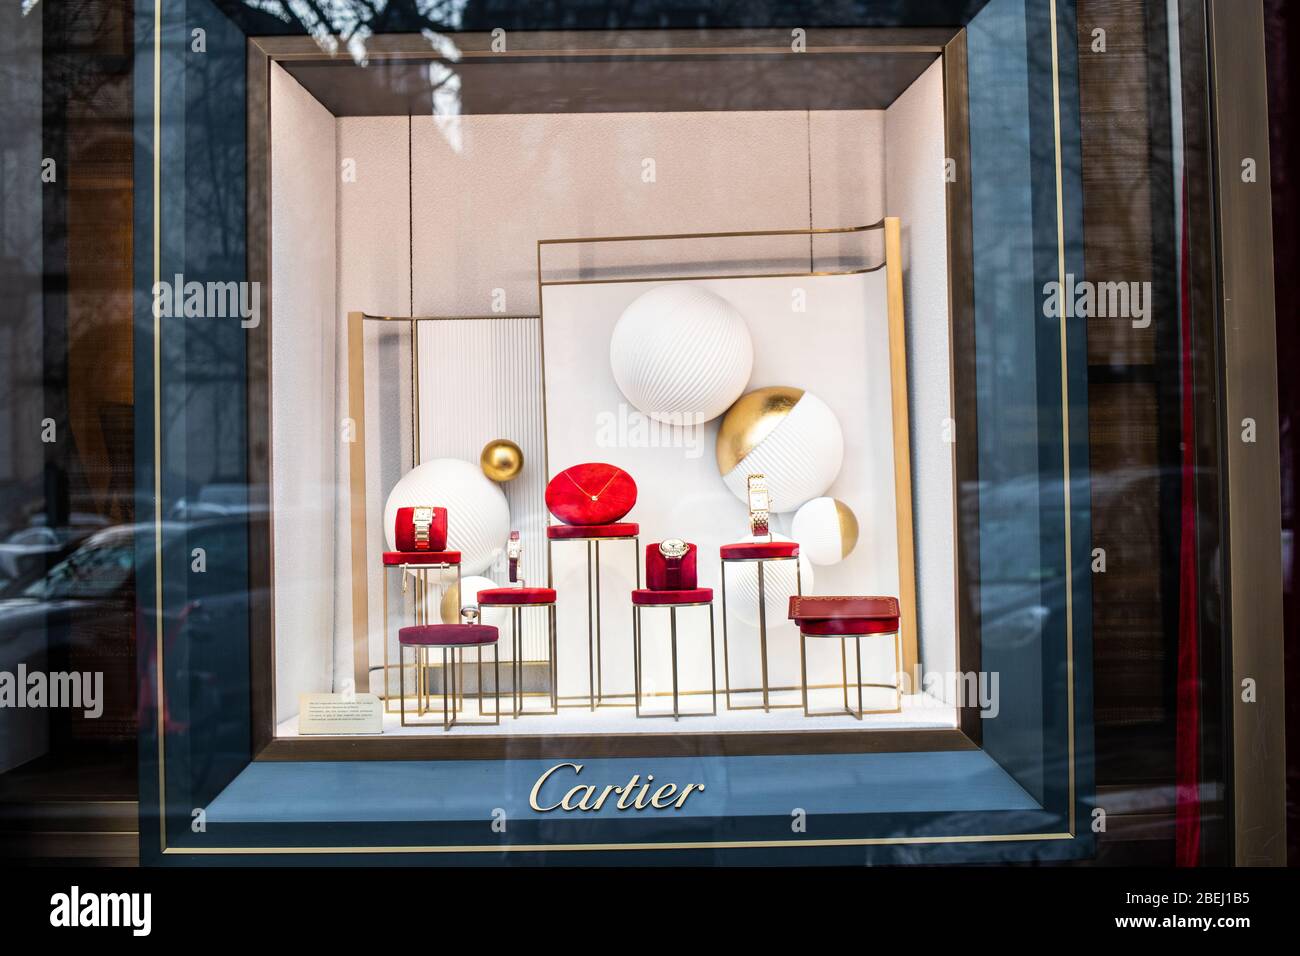 cartier jewelry store